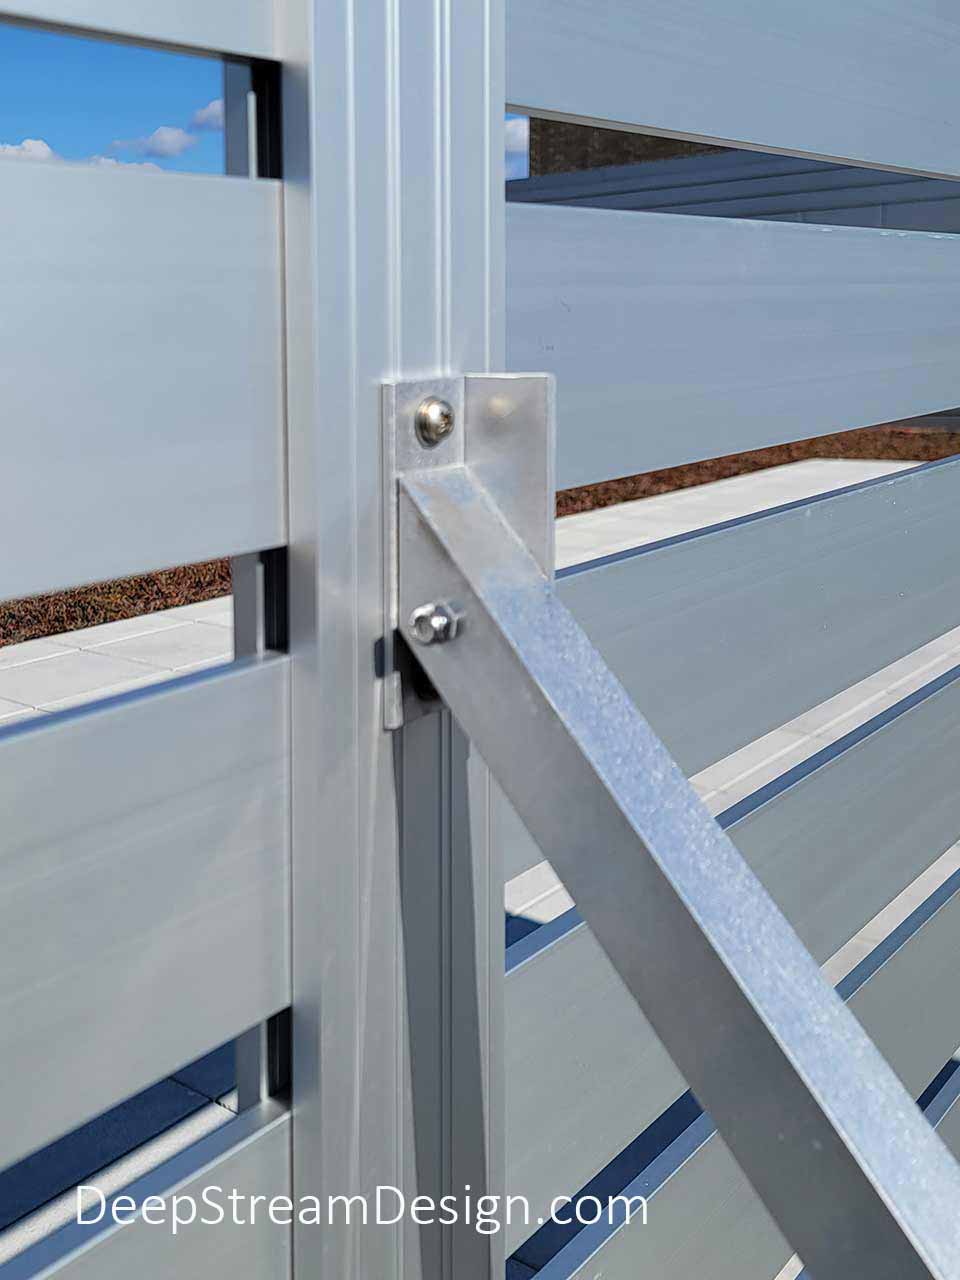 Roof Deck photo showing the detail of an aluminum strut attachment supporting DeepStream's anodized aluminum extrusion which joins two panels that make up a section of Modern Architectural Commercial Screen Wall enclosing Rooftop Mechanical Systems.